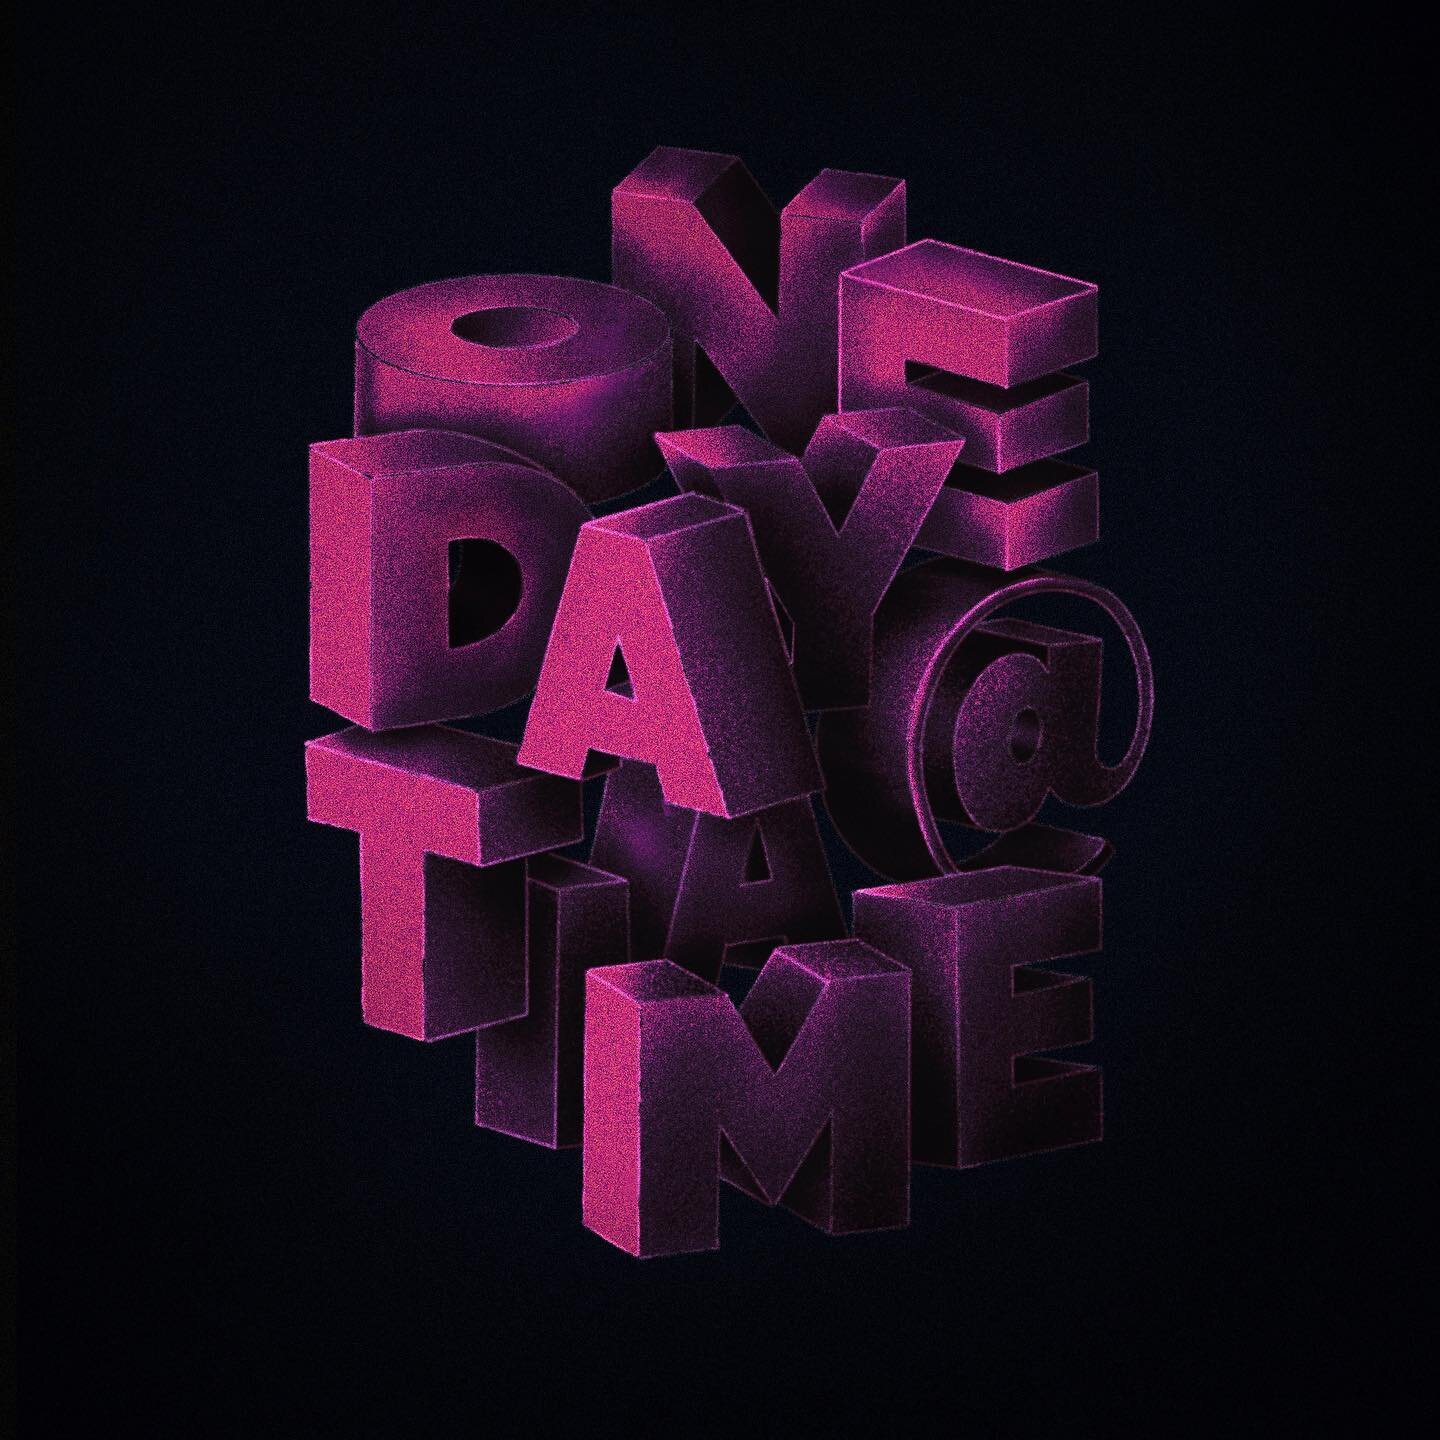 one day at a time
_
_
_
#handmade #typography #poster #design #typedesign #stopreadingmyhashtags